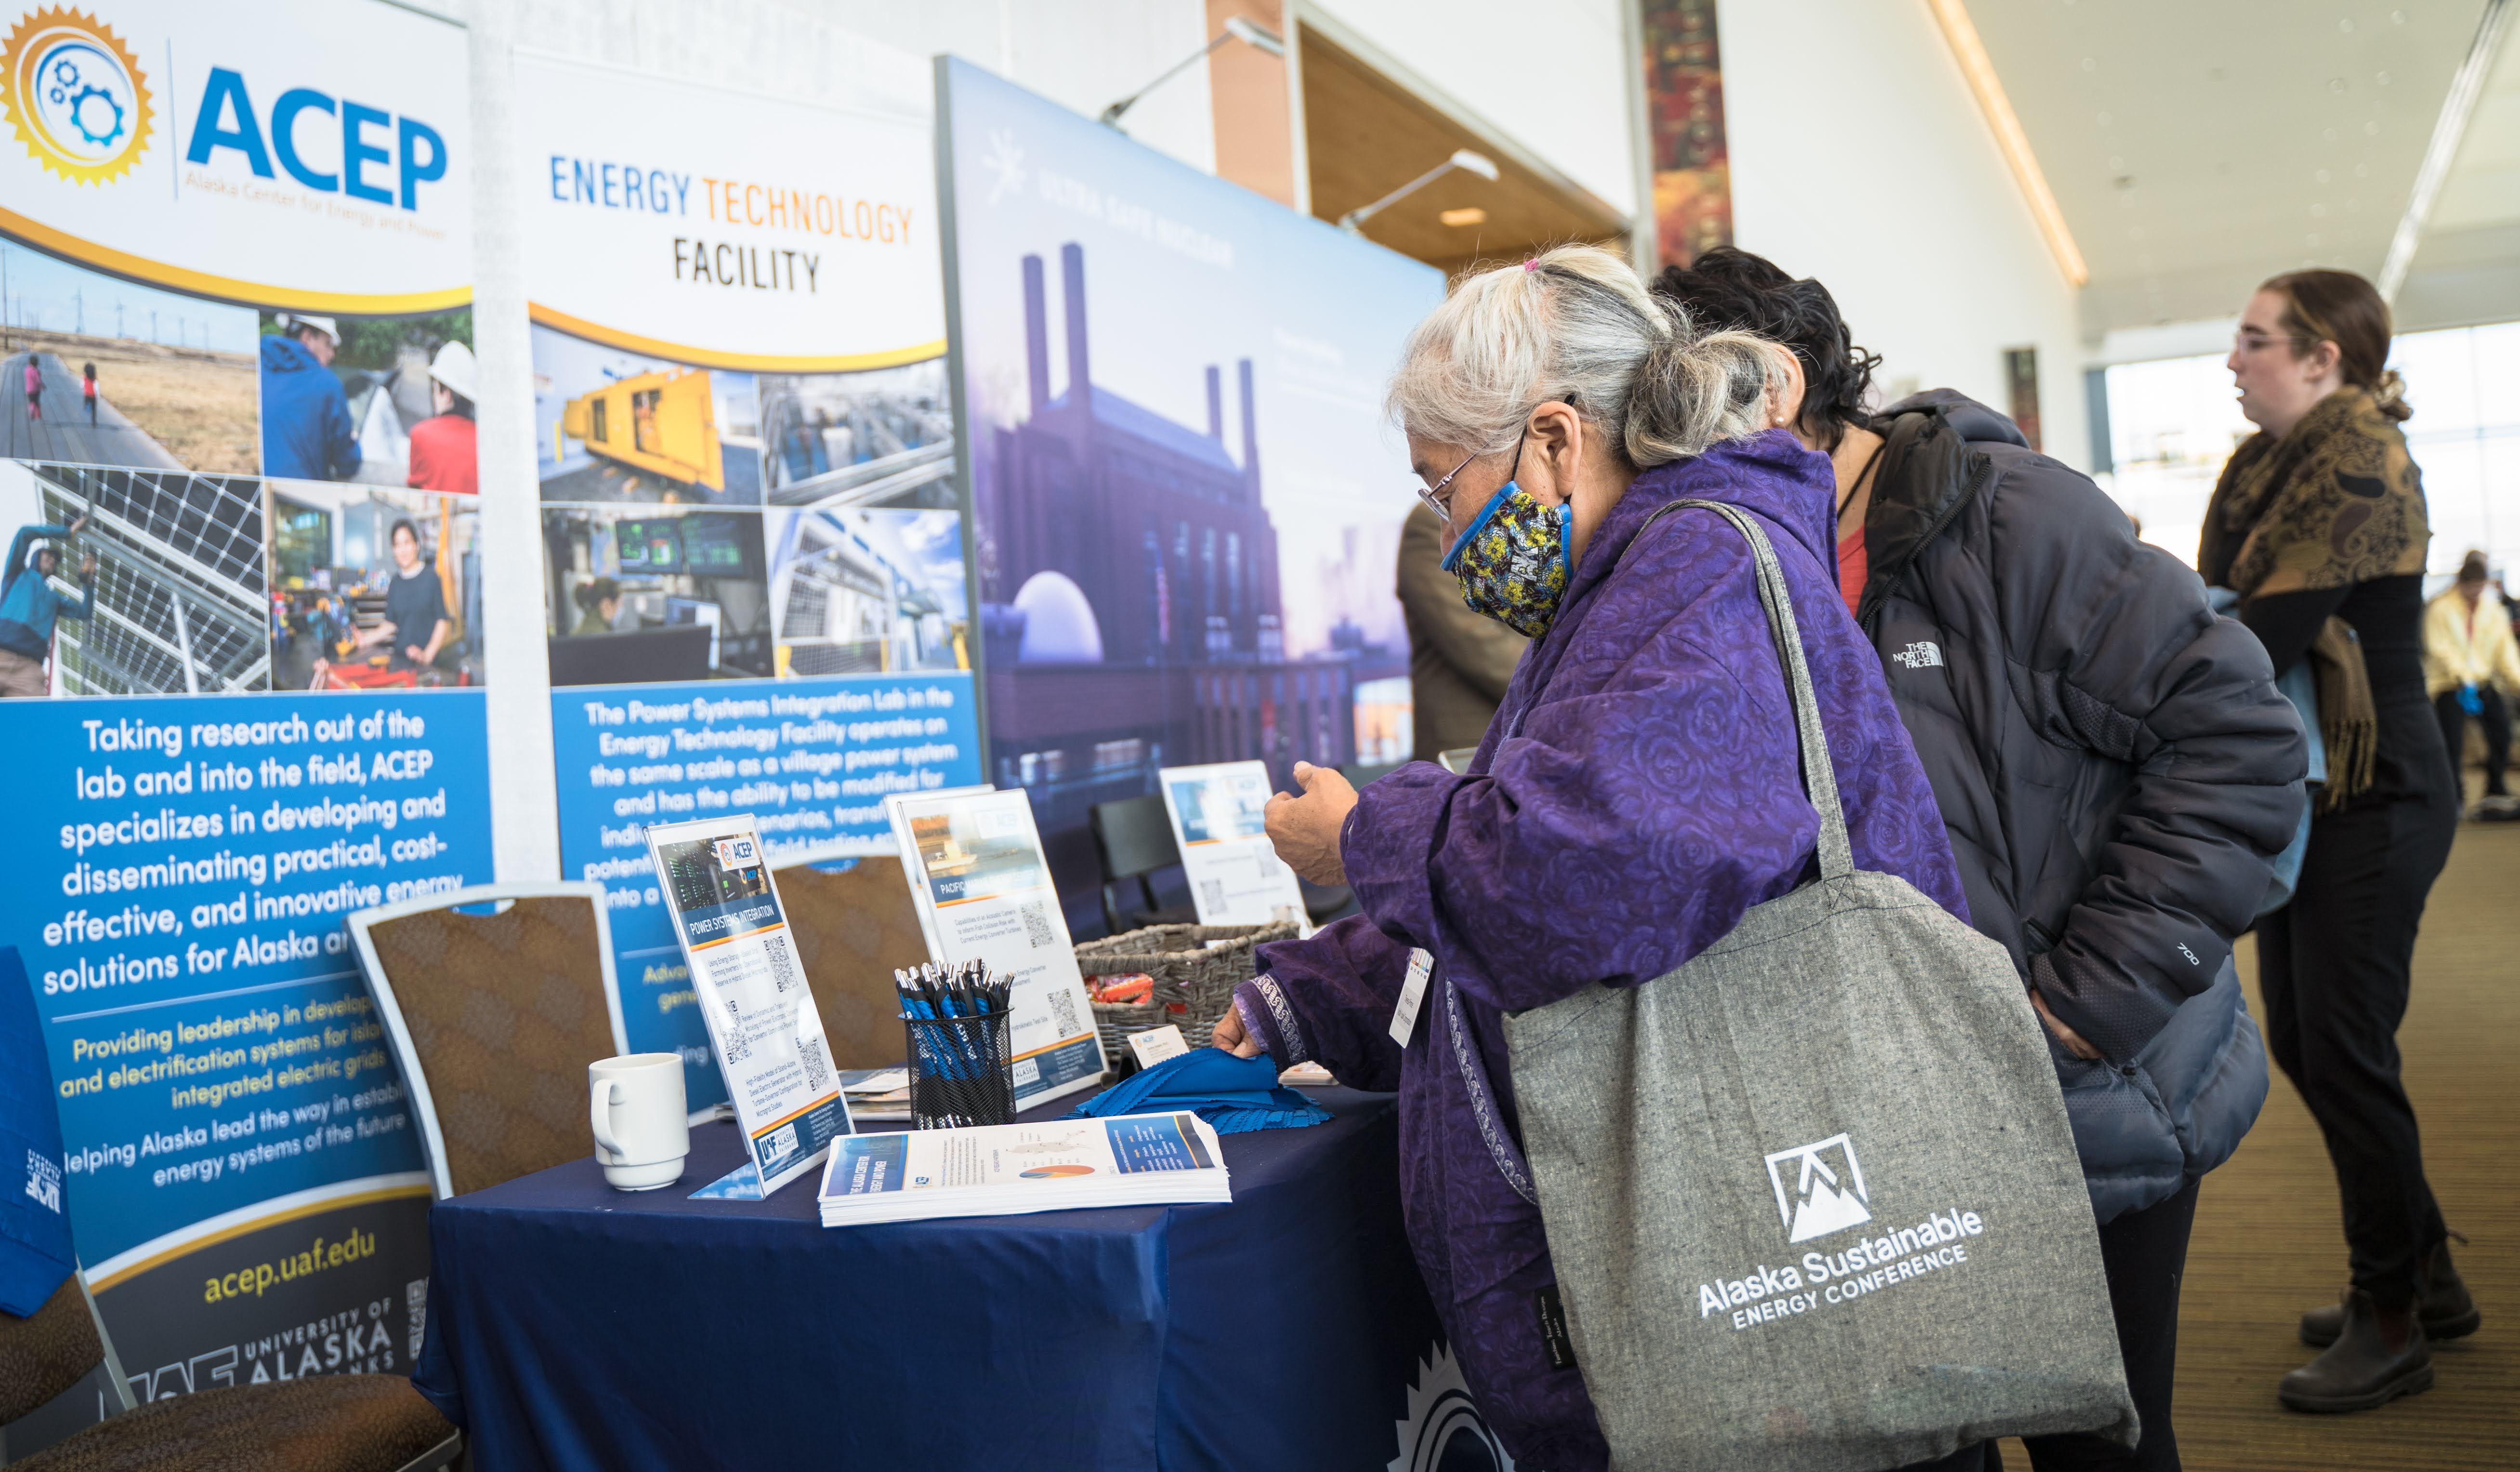 2022 Alaska Sustainable Energy Conference attendees visit ACEP's information table in between sessions. Photo by Jeff Fisher.